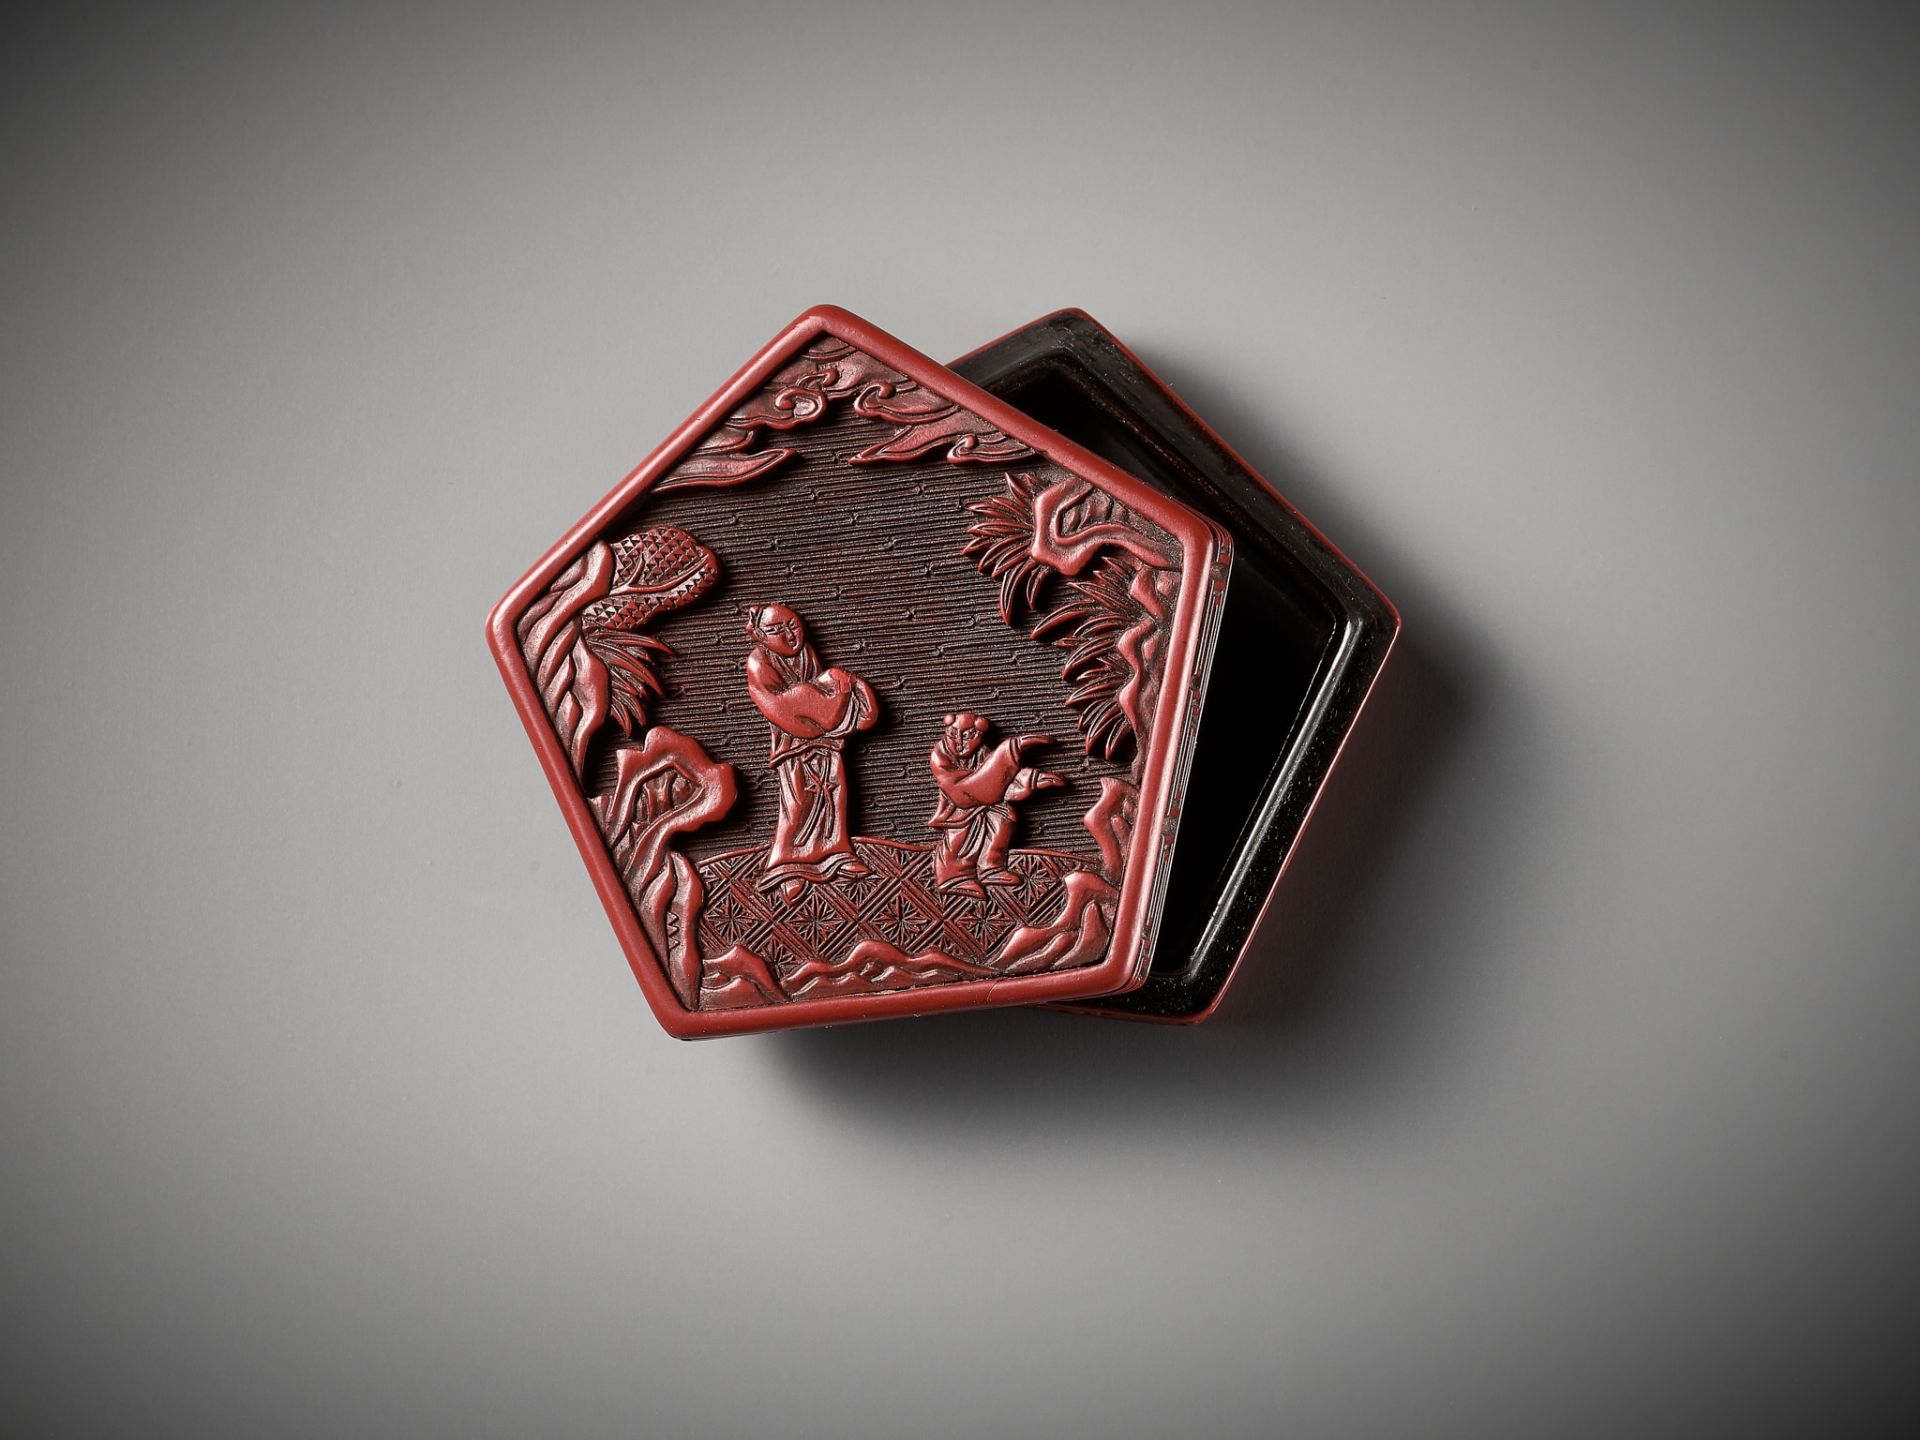 A SMALL CINNABAR LACQUER BOX AND COVER, YUAN TO MID-MING DYNASTY - Image 13 of 13